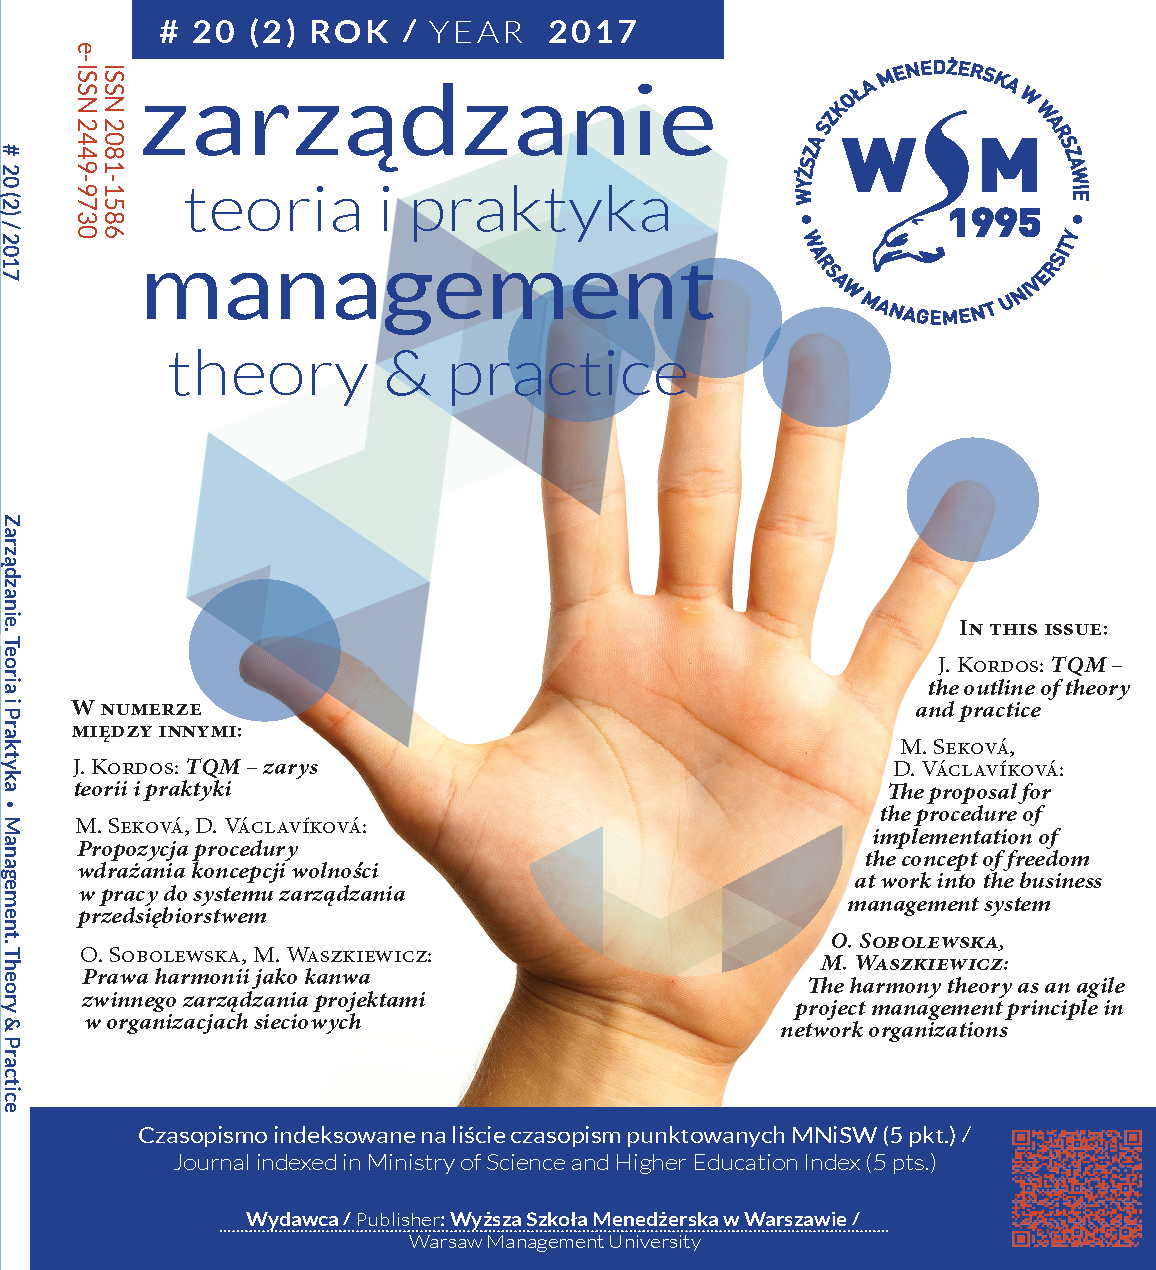 THE PROPOSAL FOR THE PROCEDURE OF IMPLEMENTATION OF THE CONCEPT OF FREEDOM AT WORK INTO THE BUSINESS MANAGEMENT SYSTEM Cover Image